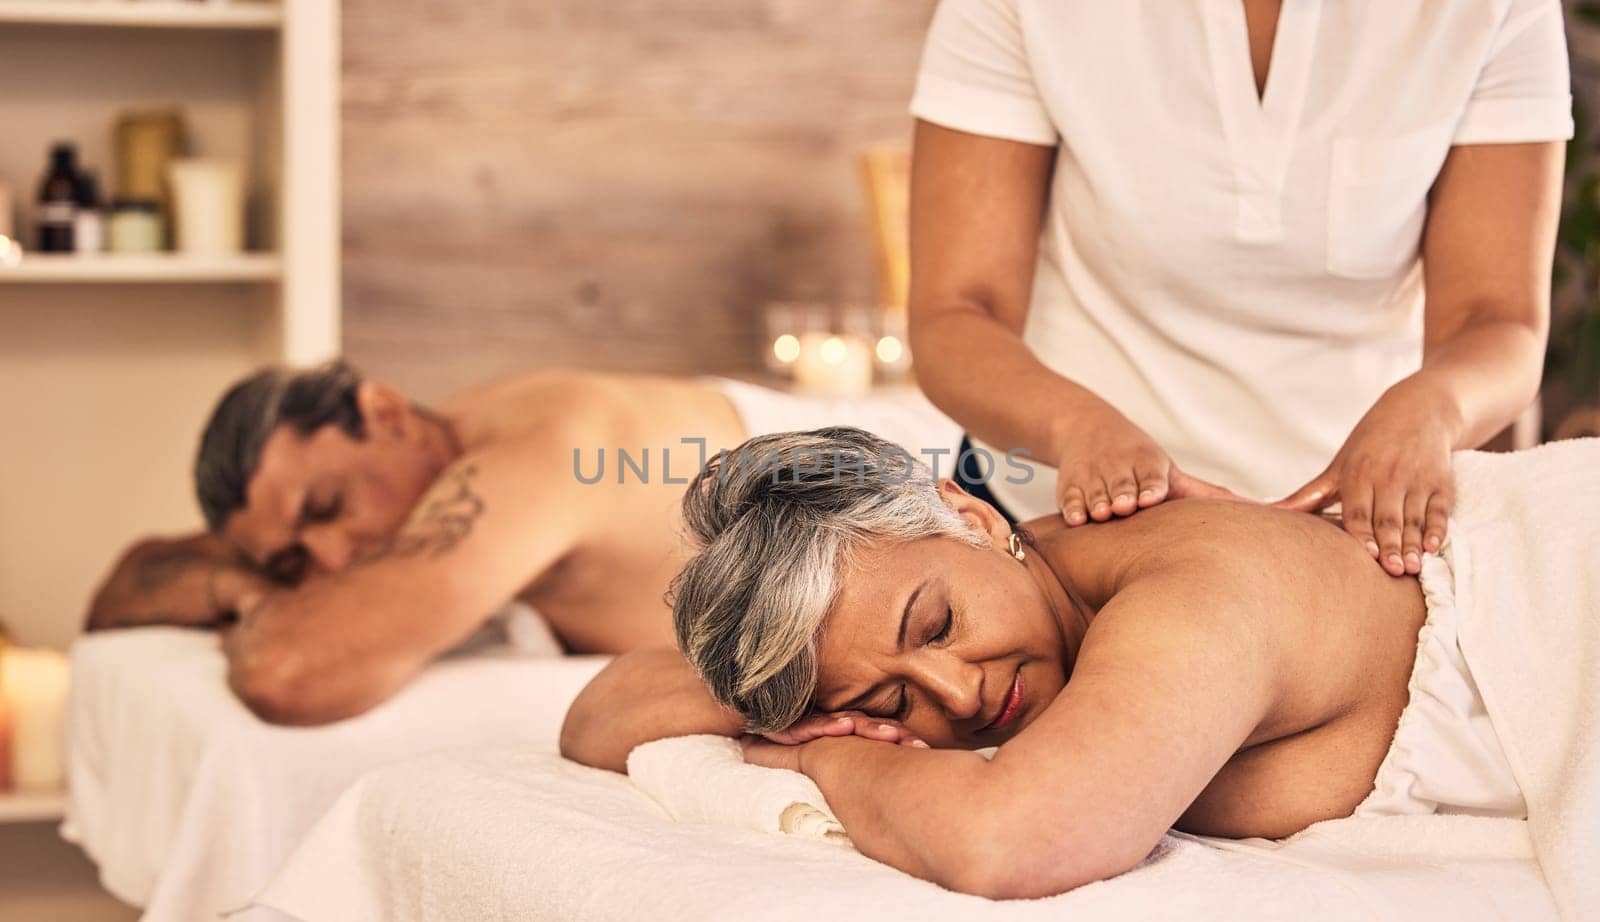 Relax, senior and a couple at the spa for a massage together for peace, wellness or bonding. Luxury, hospitality or body care with an old woman and man in a beauty salon for physical therapy by YuriArcurs